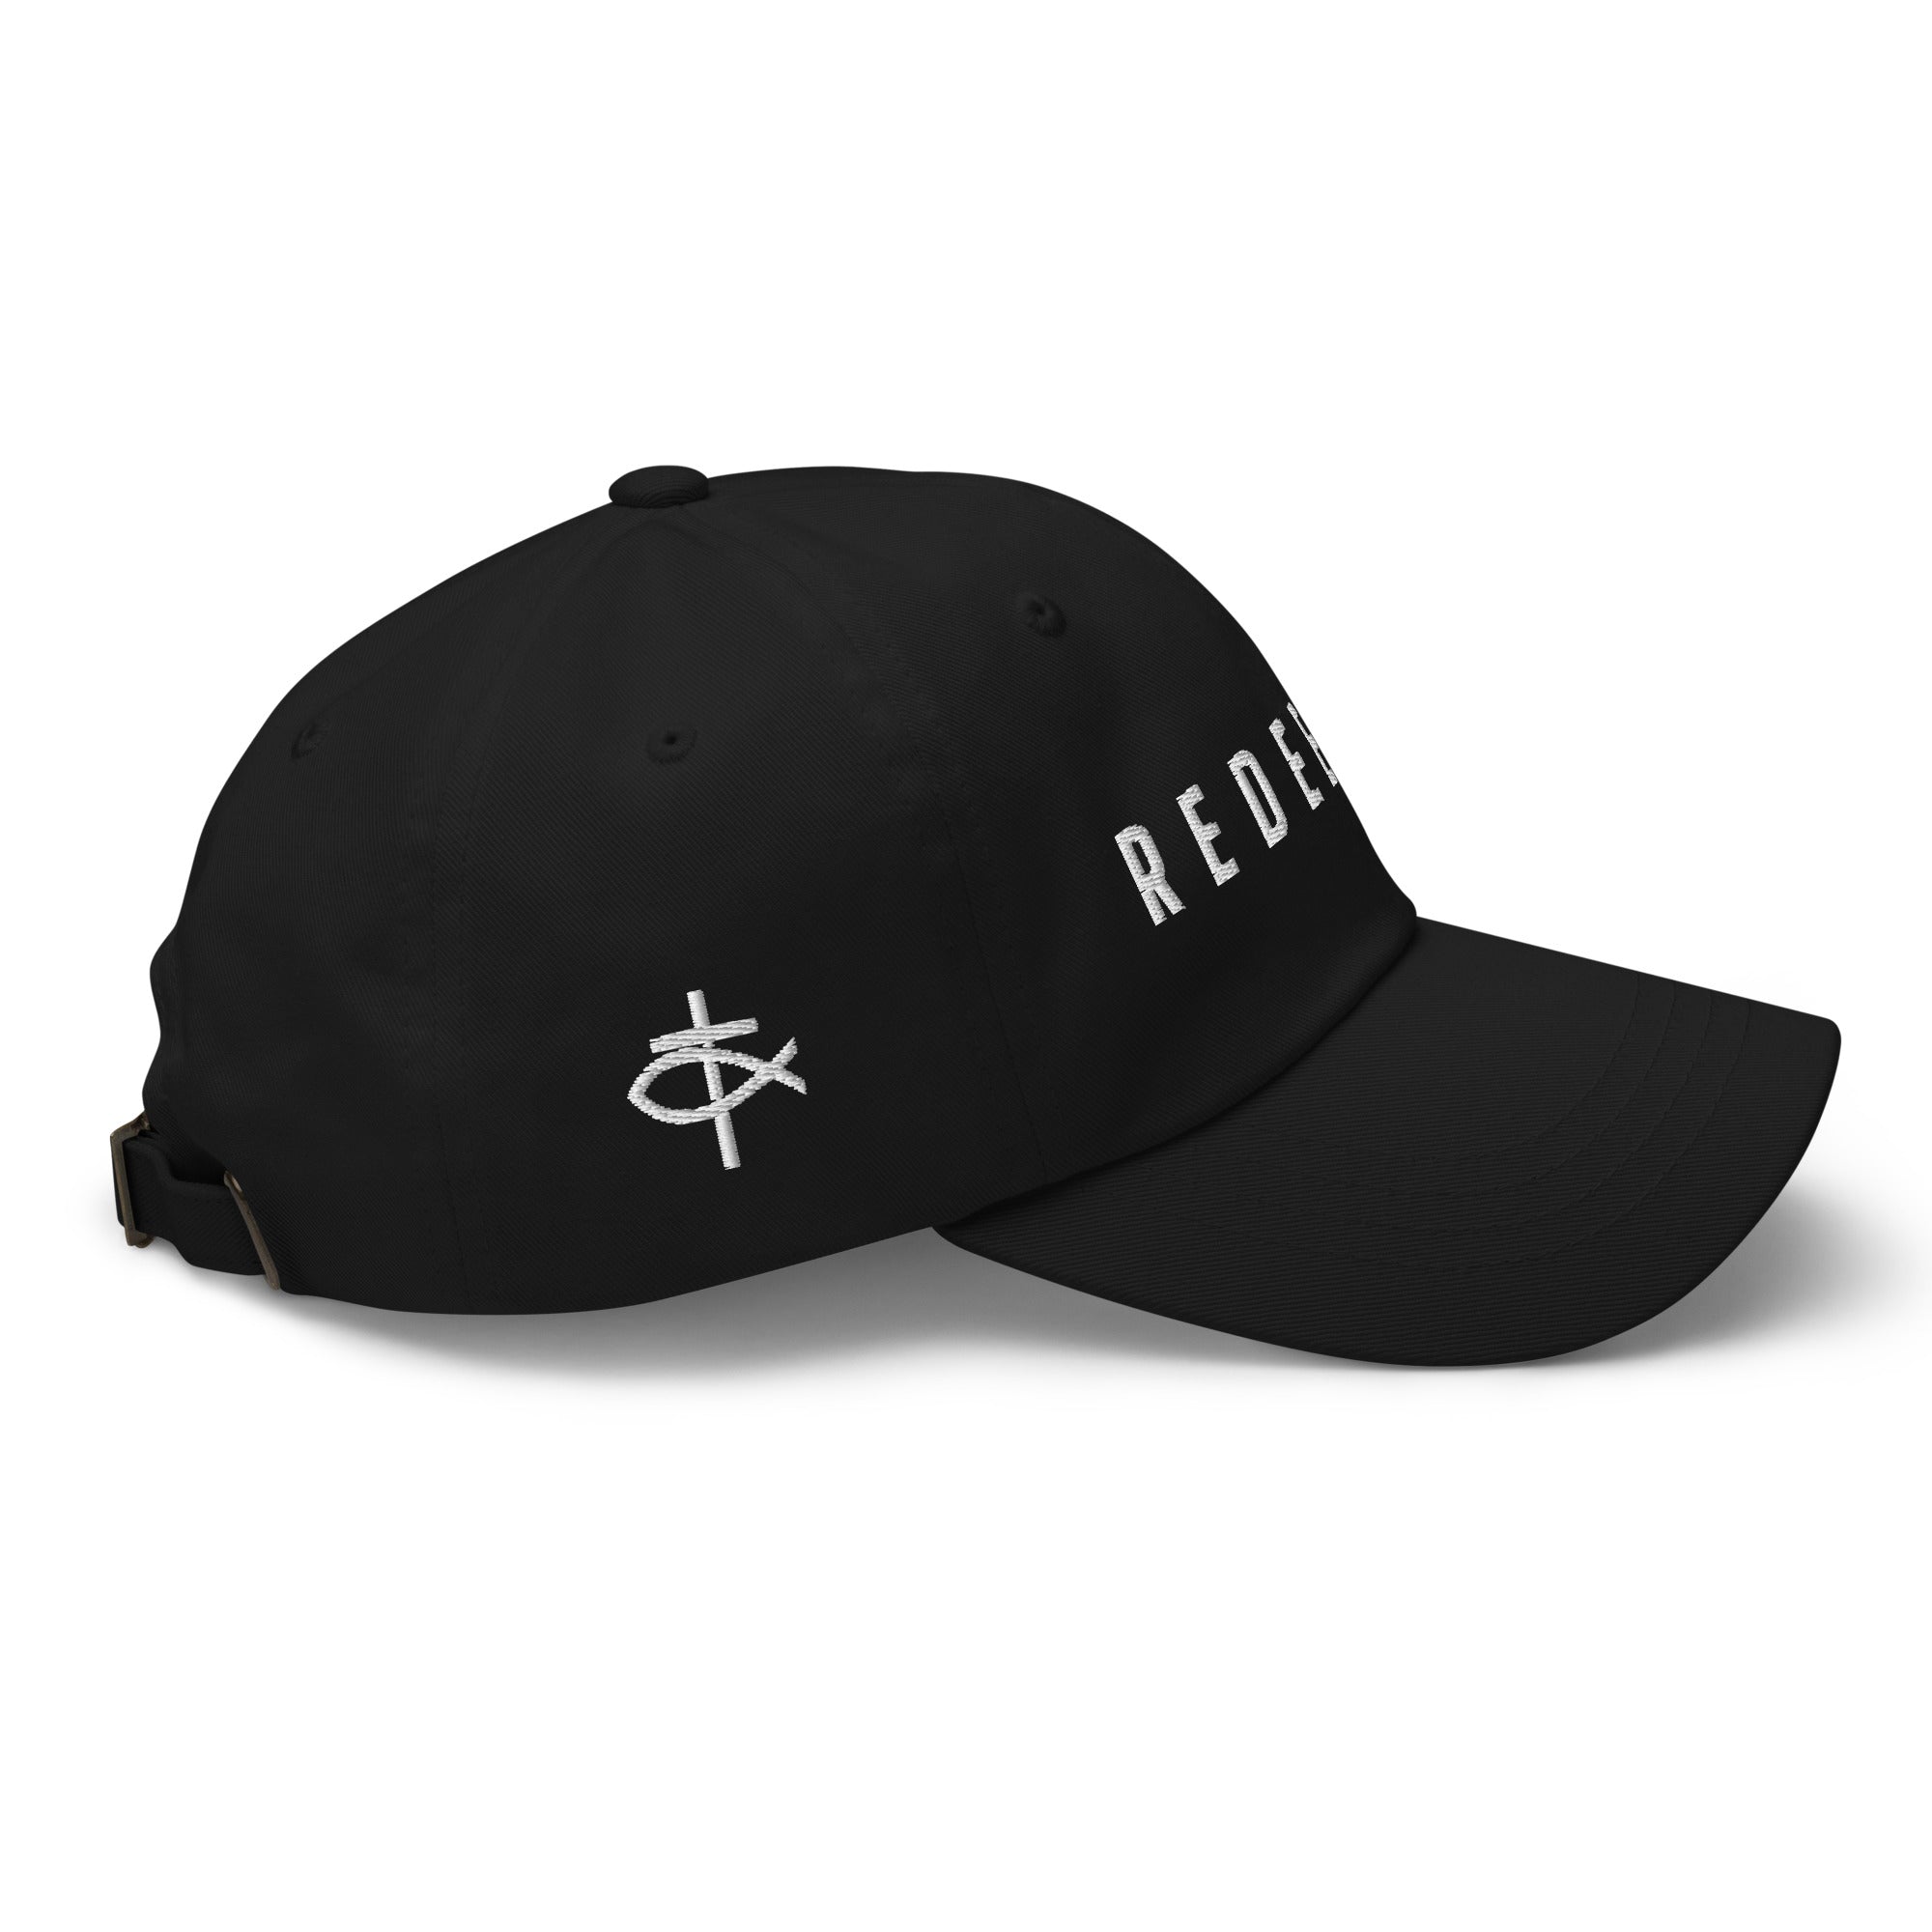 Redeemed Classic Dad's Cap with Puff Embroidery & Fish Cross Emblem Jesus Passion Apparel